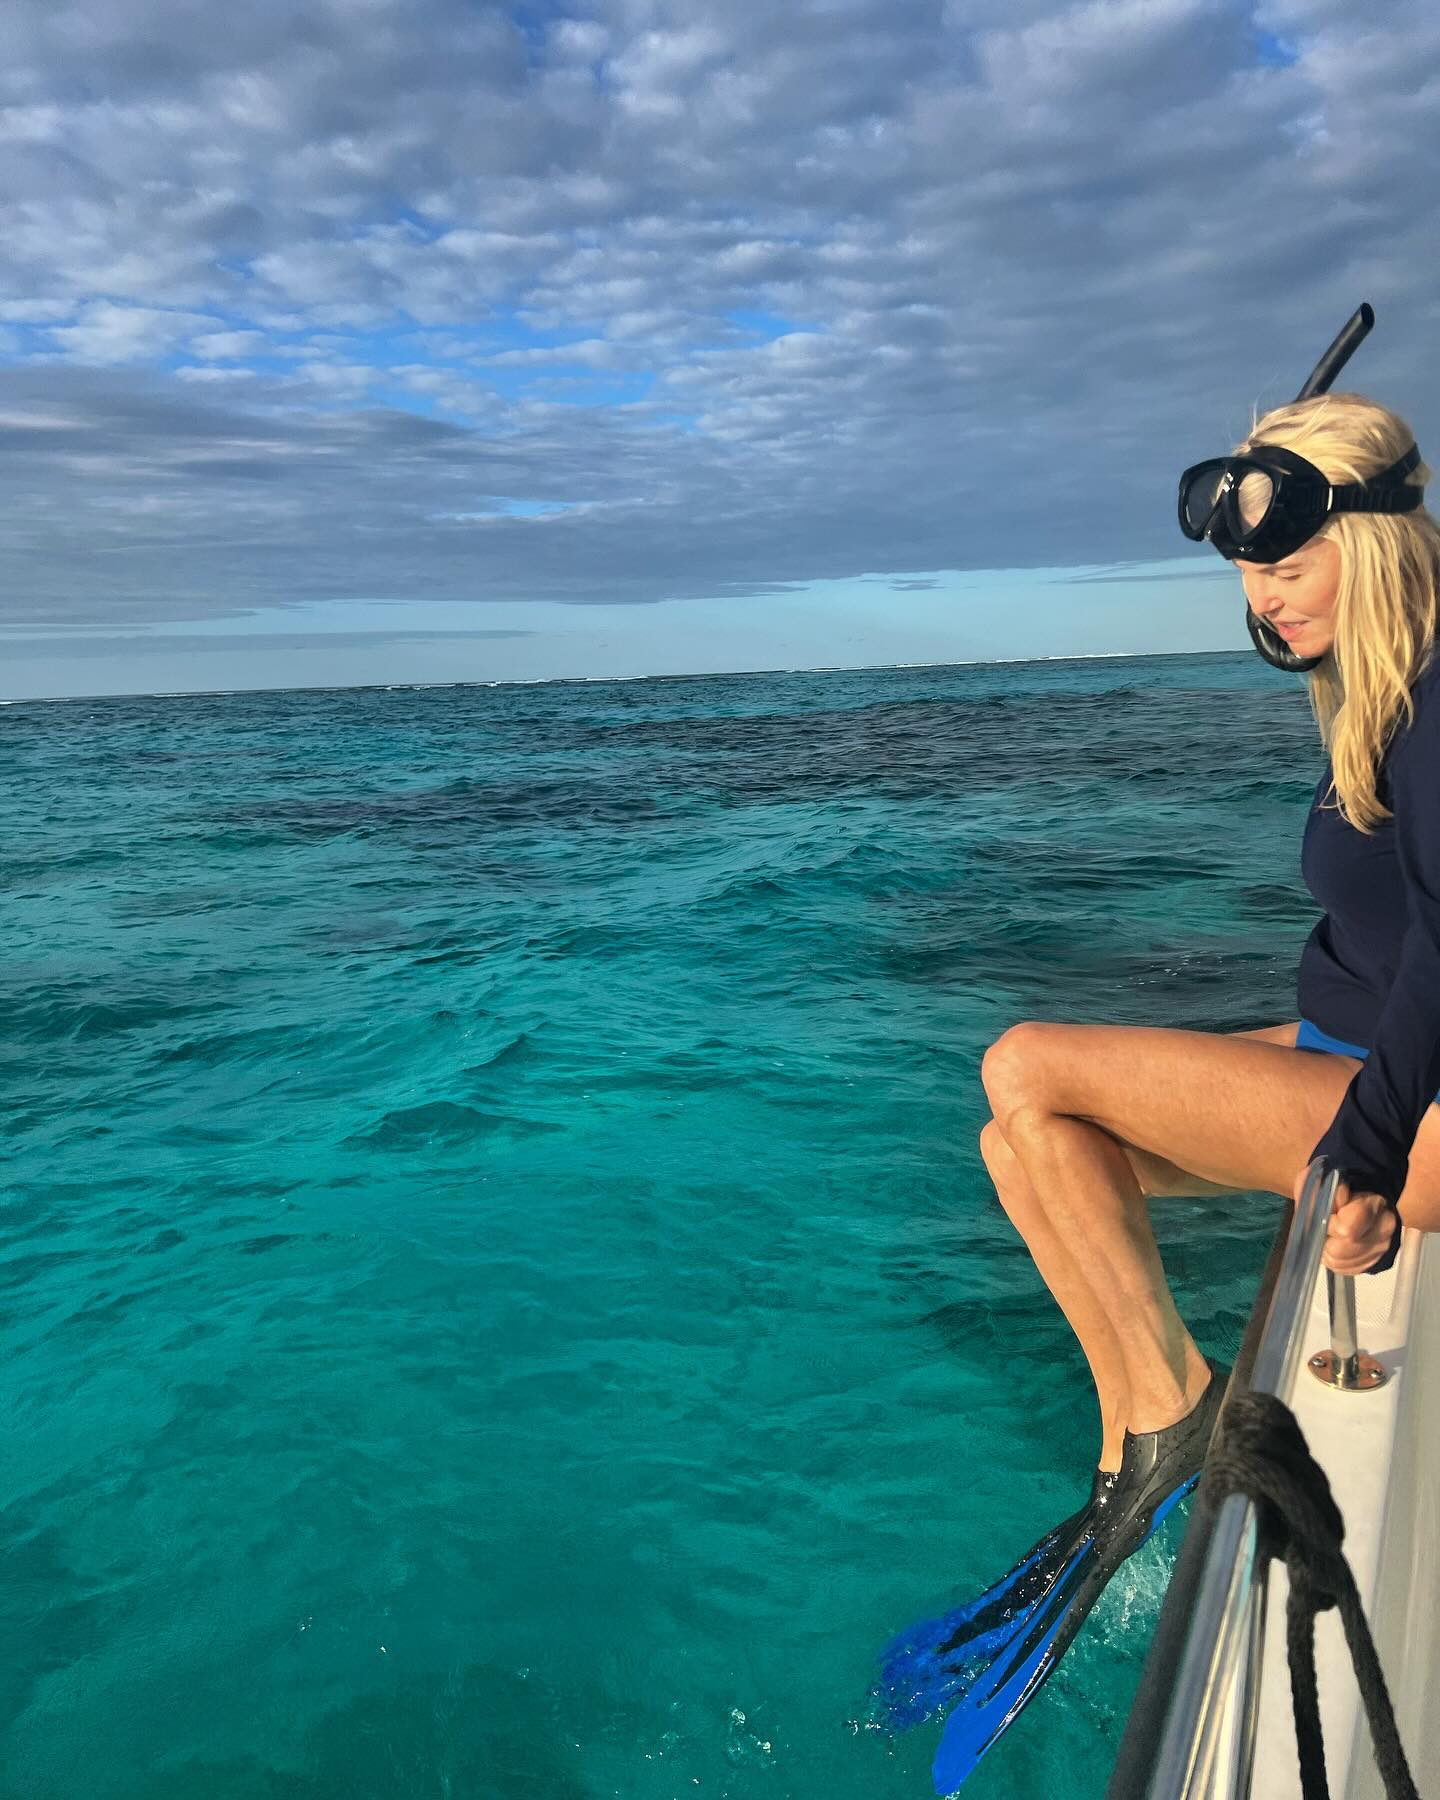 Christie has been posting photos and videos from her getaway to Turks and Caicos